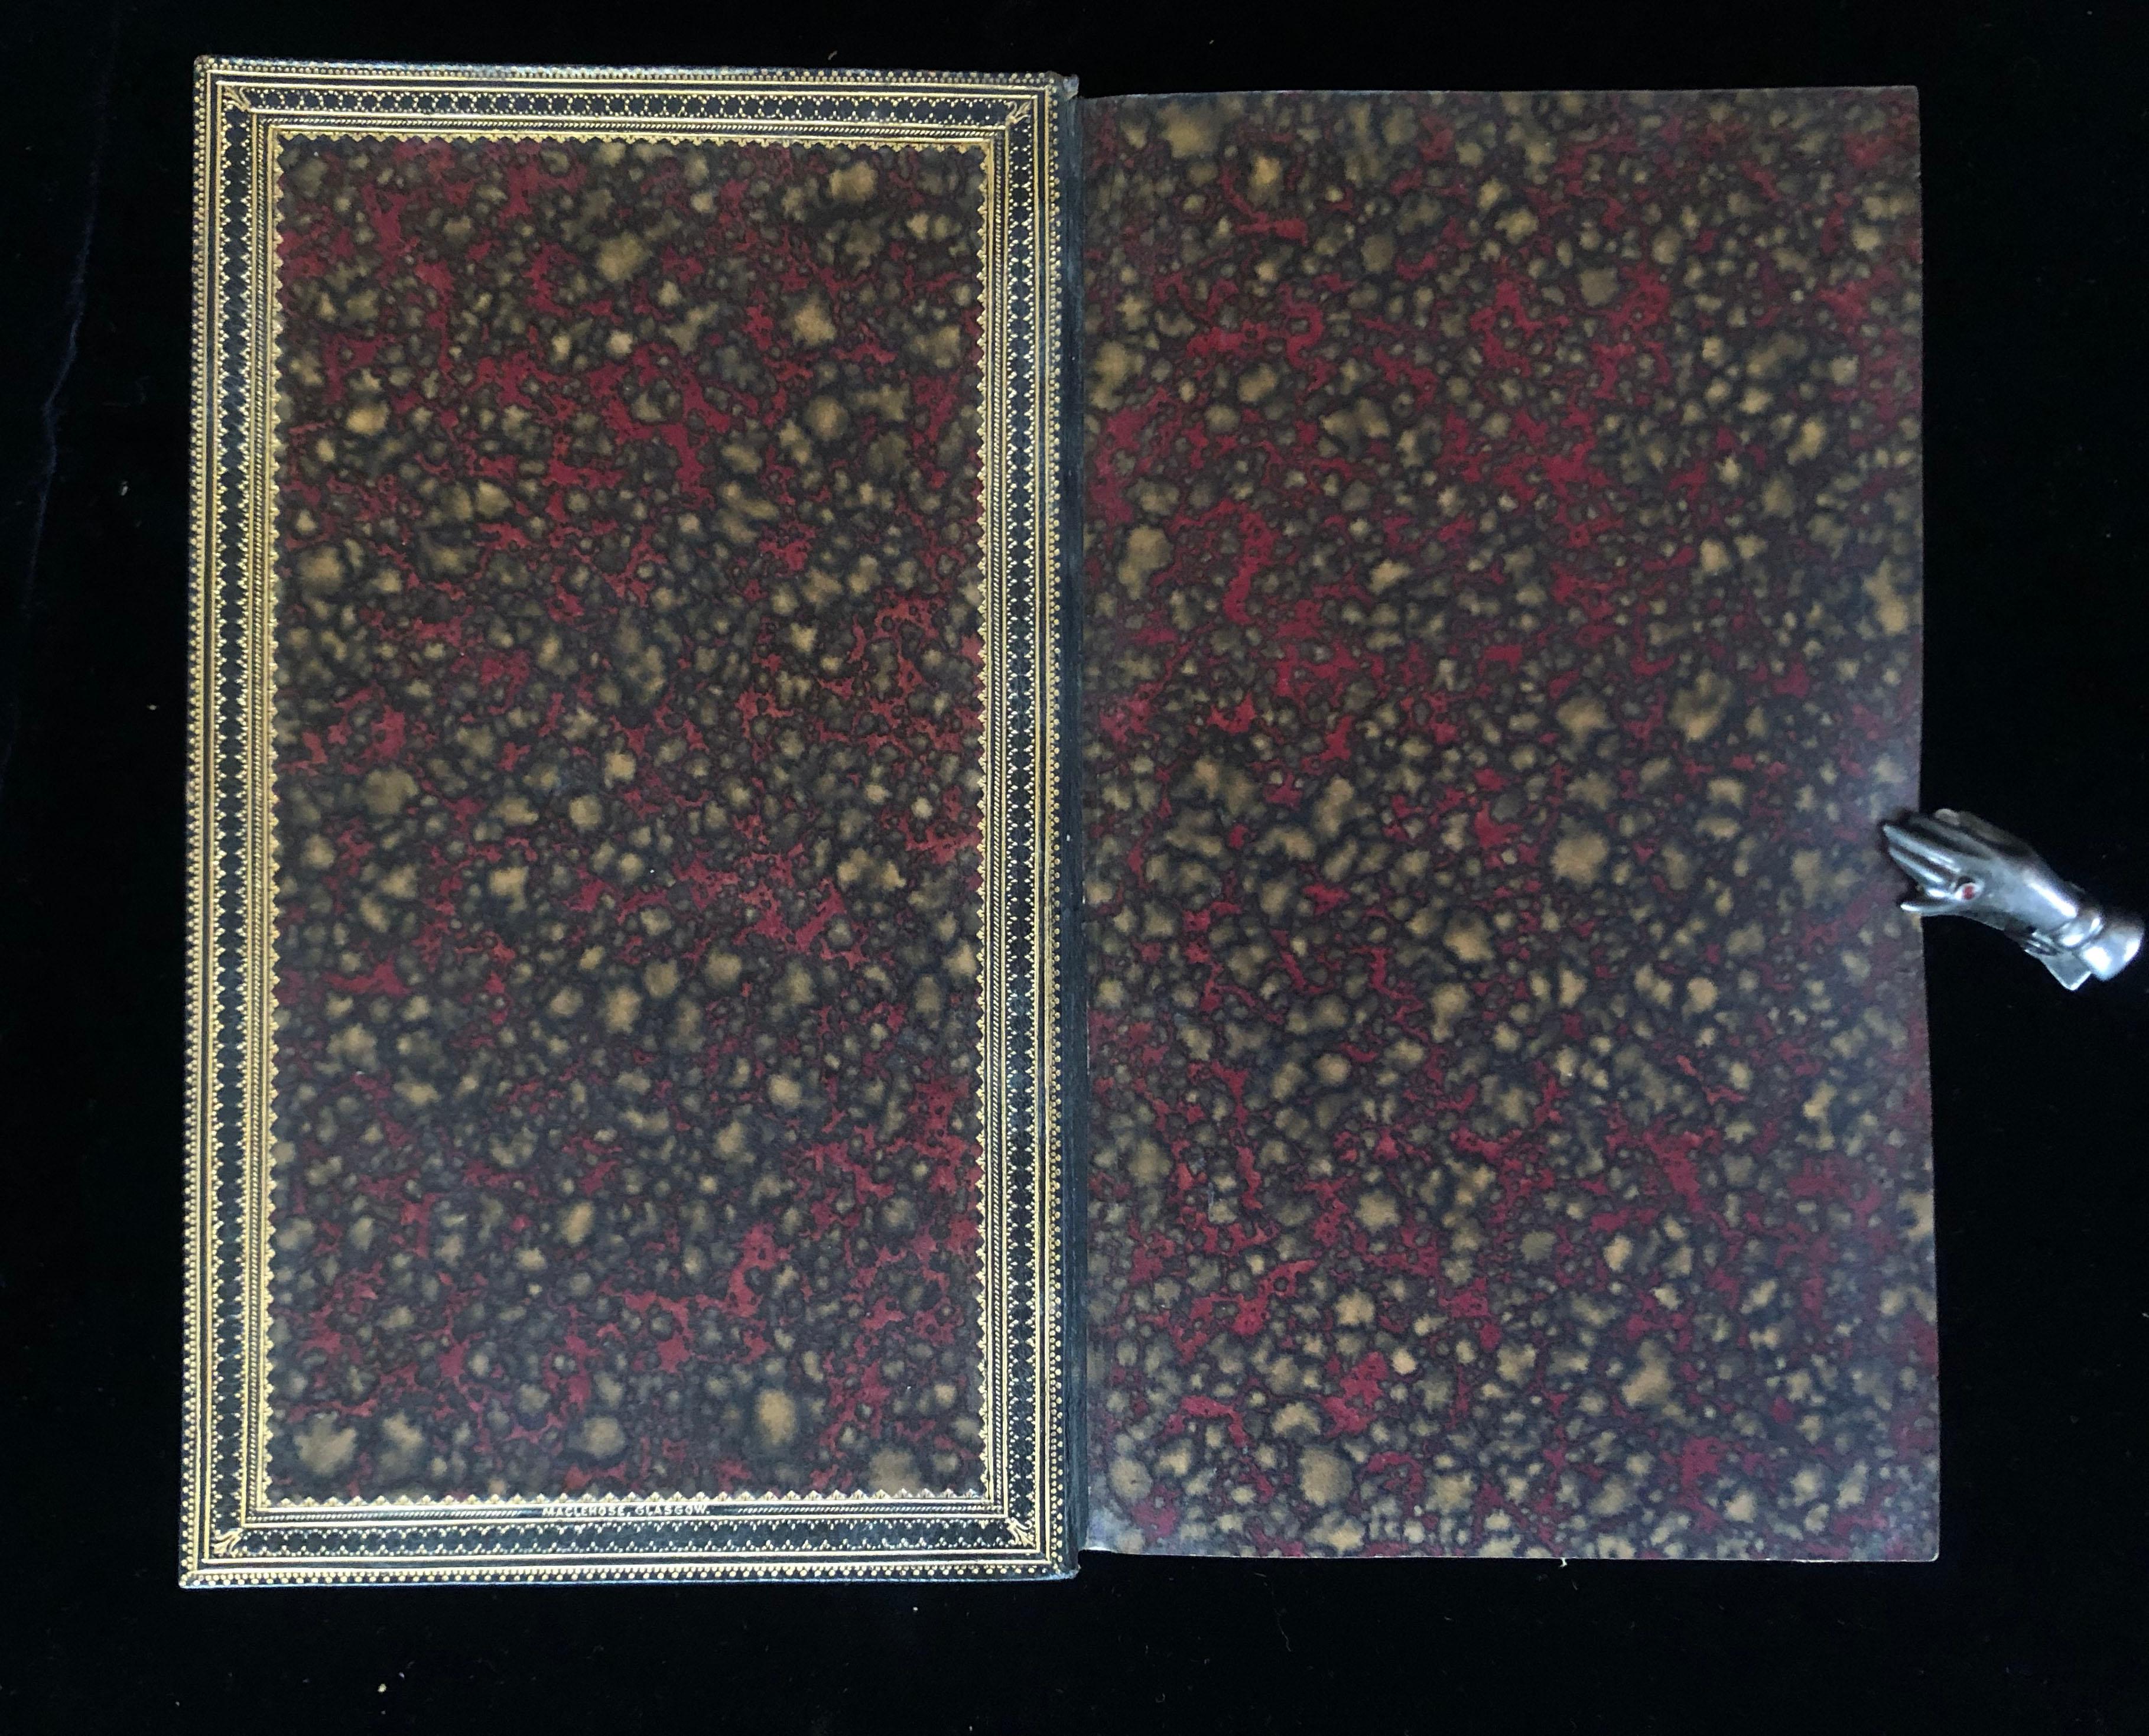 This is the FIRST EDITION OF ROBERT FERGUSSON'S POEMS in a very attractive binding. It presents poems in both English (1-84) and Scots (80-121) and includes a Glossary of Scots words contained in the poems. Edinburgh-born bohemian poet ROBERT